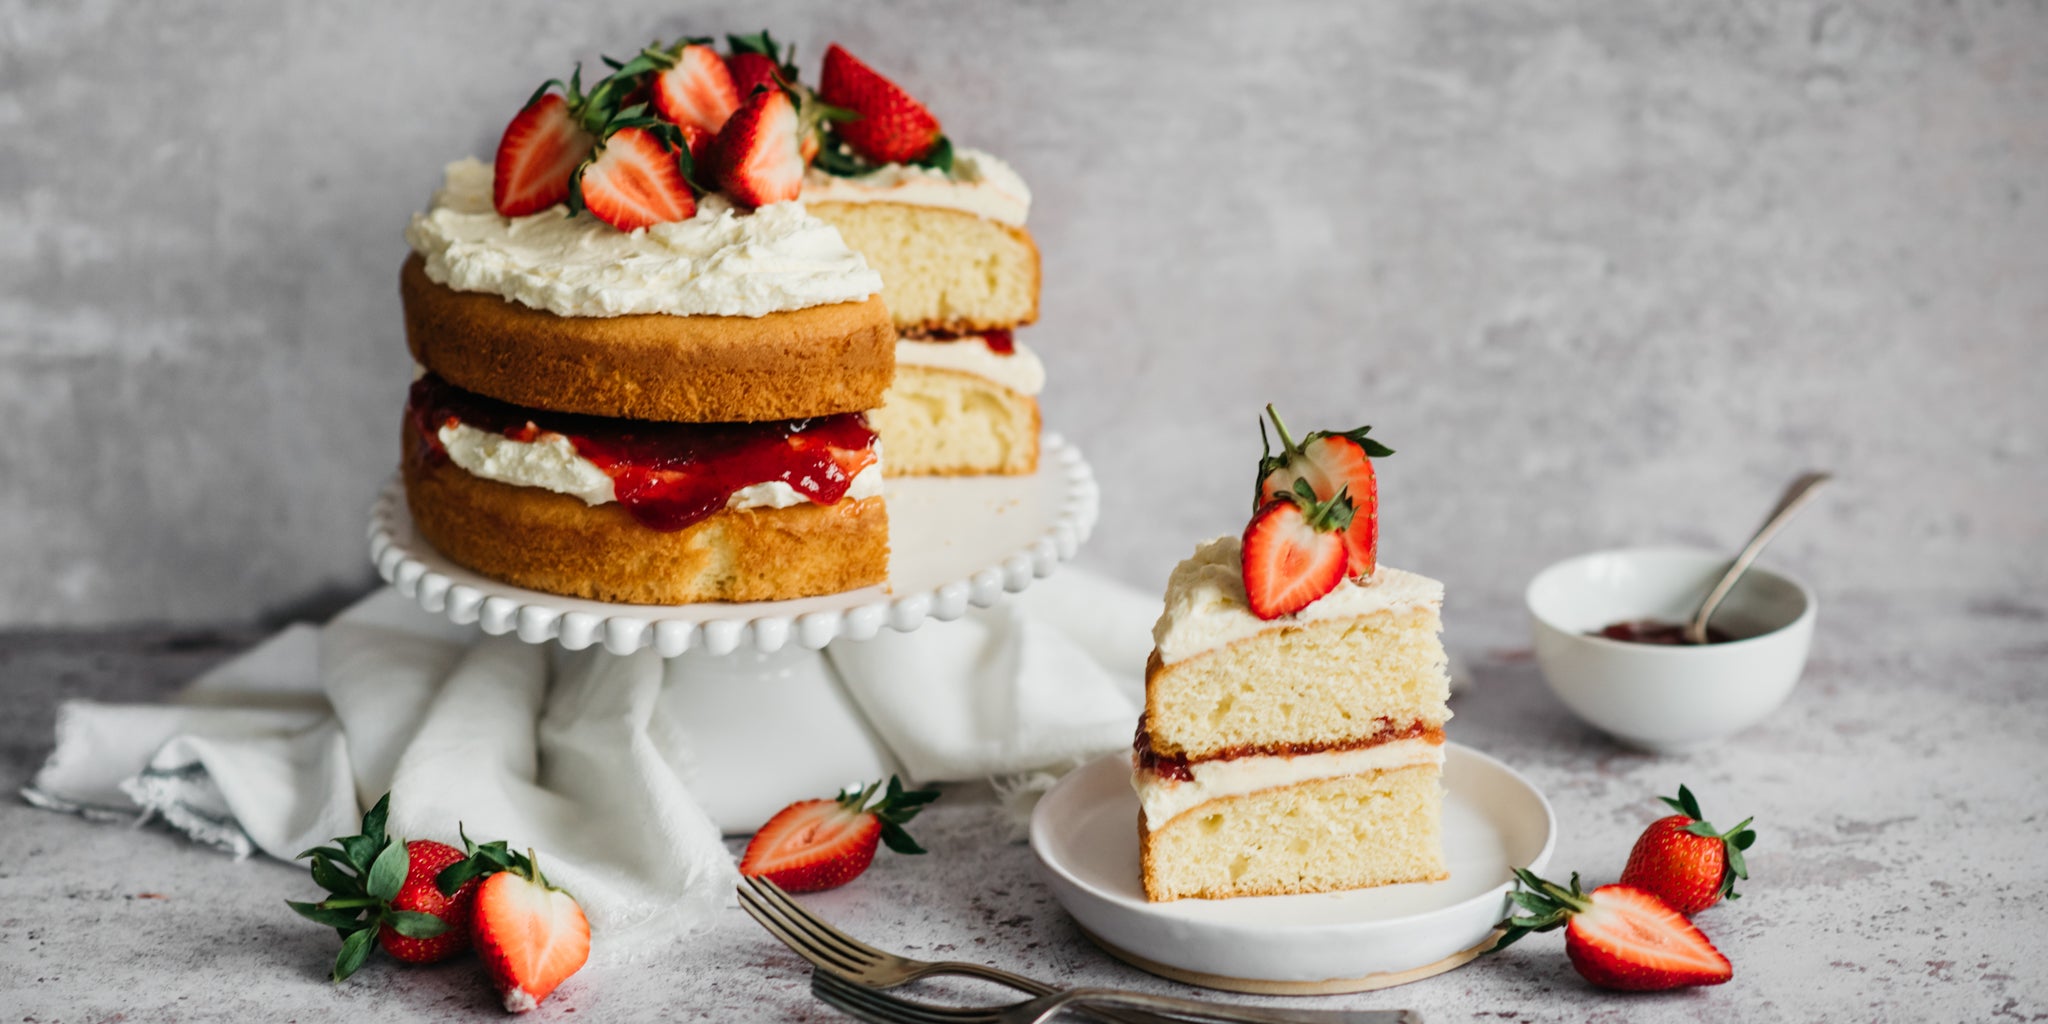 Gluten Free Victoria Sponge served on a cake stand, with a large slice cut out showing the delicious cream and jam filling